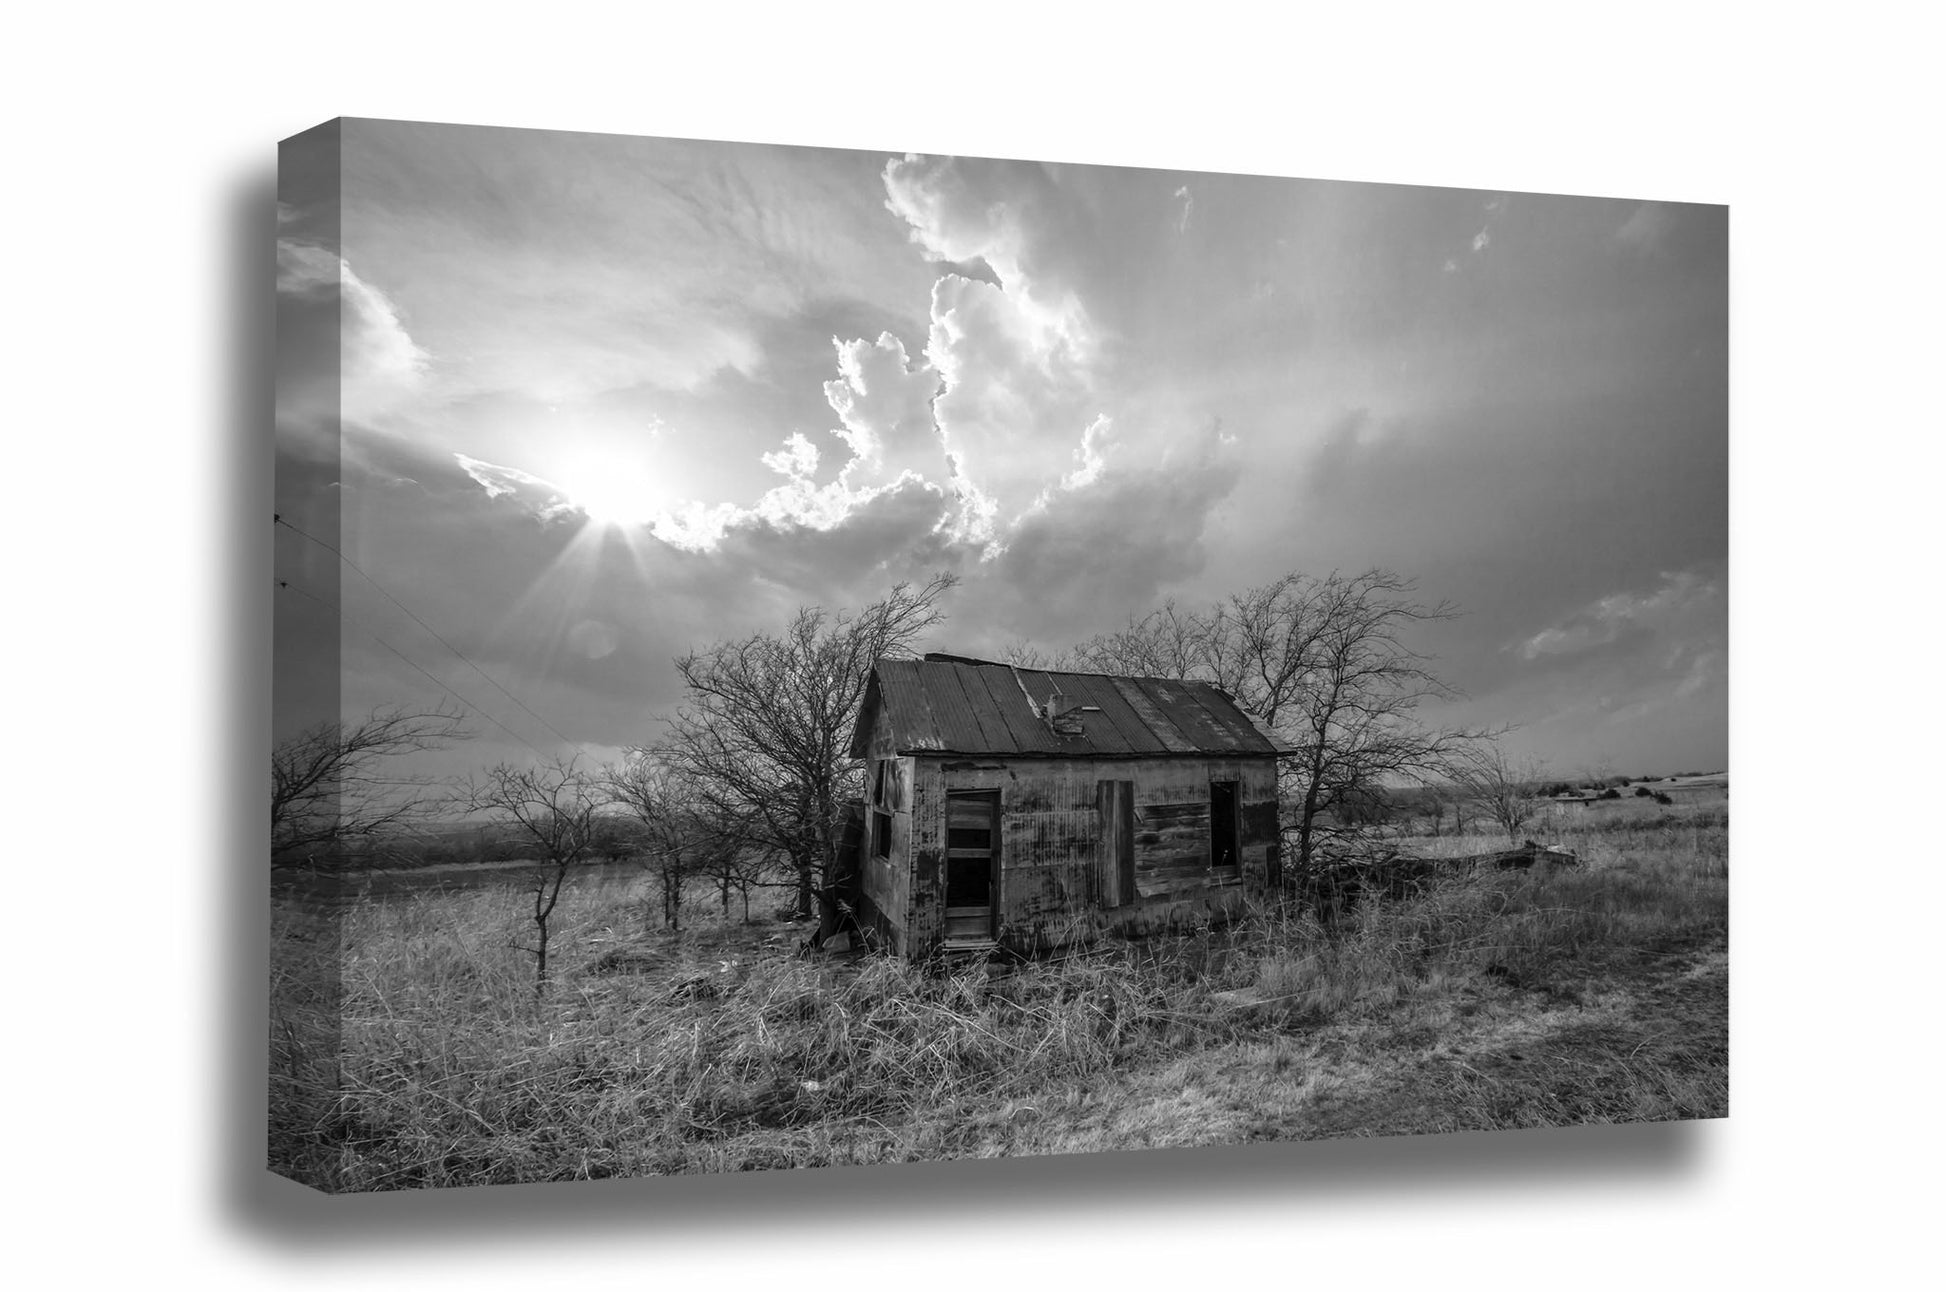 Black and white canvas wall art of sunlight breaking through storm clouds over an abandoned homestead on the Kansas prairie by Sean Ramsey of Southern Plains Photography.